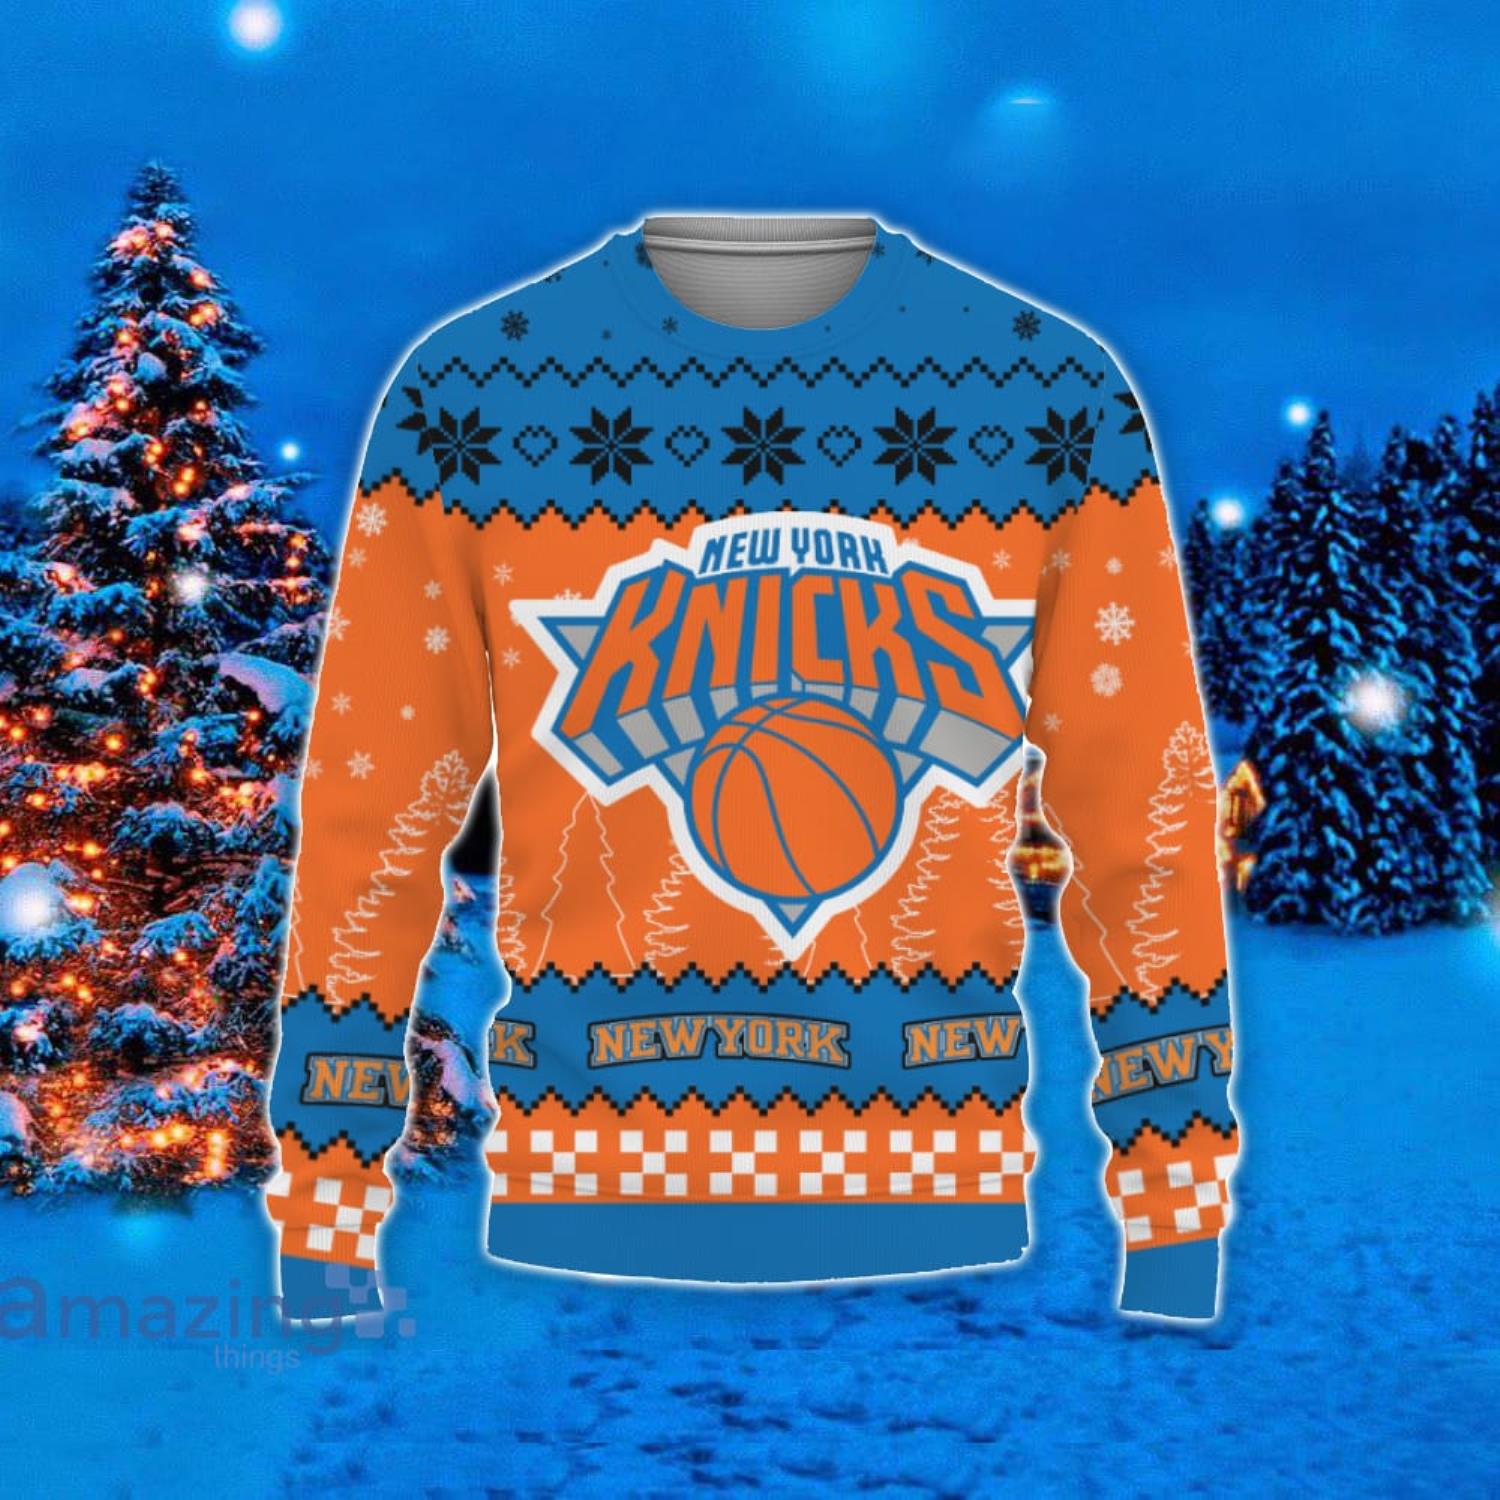 Team Logo Snowflake Pattern Minnesota Timberwolves Ugly Christmas Sweater  For Fans